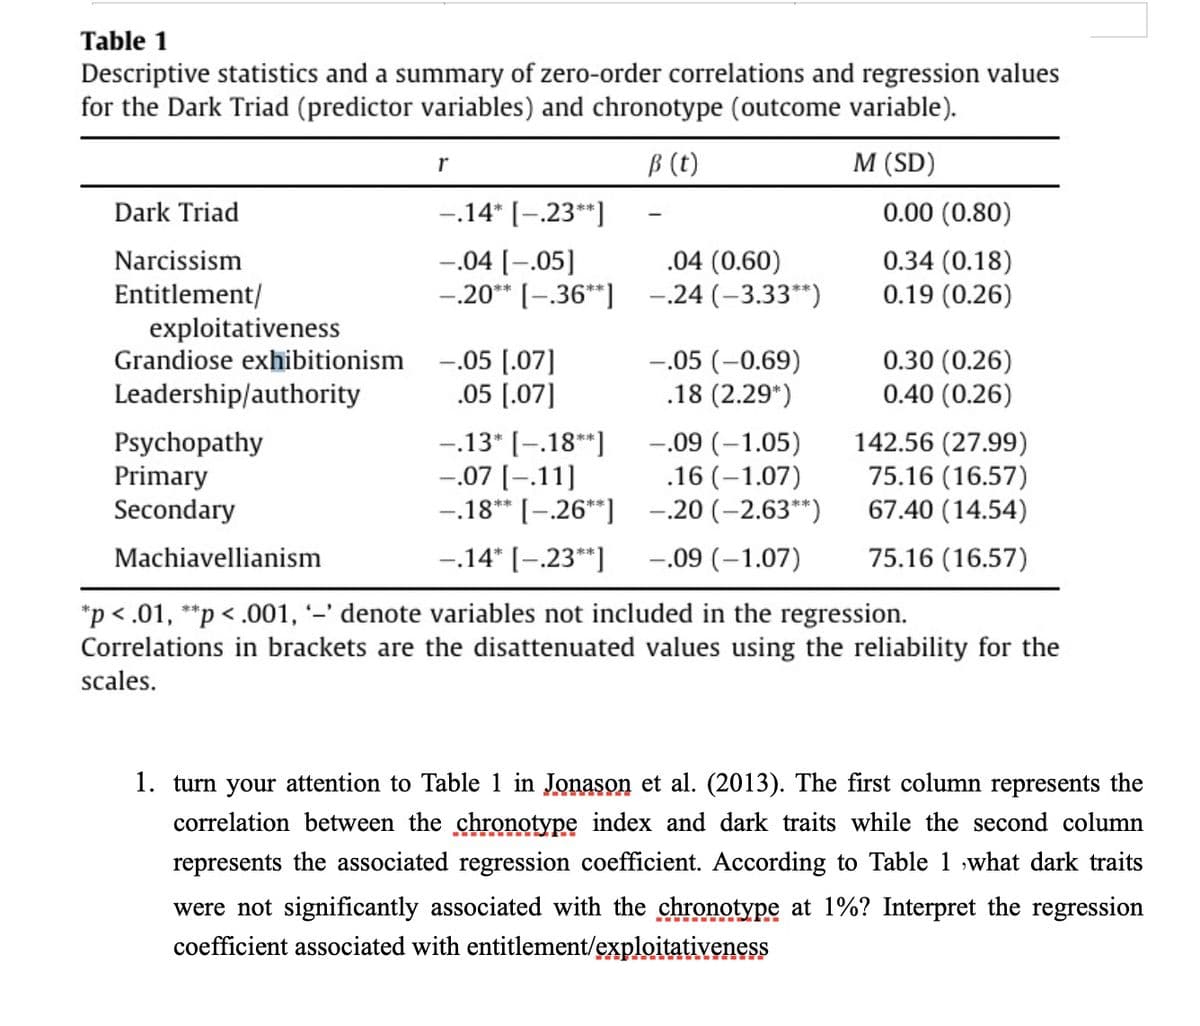 Table 1
Descriptive statistics and a summary of zero-order correlations and regression values
for the Dark Triad (predictor variables) and chronotype (outcome variable).
r
ẞ (t)
M (SD)
Dark Triad
-.14* [-.23**]
0.00 (0.80)
Narcissism
-.04 [-.05]
.04 (0.60)
0.34 (0.18)
Entitlement/
-.20** [-.36**]
-.24 (-3.33**)
0.19 (0.26)
exploitativeness
Grandiose exhibitionism
-.05 [.07]
-.05 (-0.69)
0.30 (0.26)
Leadership/authority
.05 [.07]
.18 (2.29*)
0.40 (0.26)
Psychopathy
-.13* [-.18**]
-.09 (-1.05)
142.56 (27.99)
Primary
-.07 [-.11]
.16 (-1.07)
75.16 (16.57)
Secondary
-.18** [-.26**]
-.20 (-2.63**)
67.40 (14.54)
Machiavellianism
-.14* [-.23**]
-.09 (-1.07)
75.16 (16.57)
*p < .01, **p < .001, '-' denote variables not included in the regression.
Correlations in brackets are the disattenuated values using the reliability for the
scales.
1. turn your attention to Table 1 in Jonason et al. (2013). The first column represents the
correlation between the chronotype index and dark traits while the second column
represents the associated regression coefficient. According to Table 1,what dark traits
were not significantly associated with the chronotype at 1%? Interpret the regression
coefficient associated with entitlement/exploitativeness